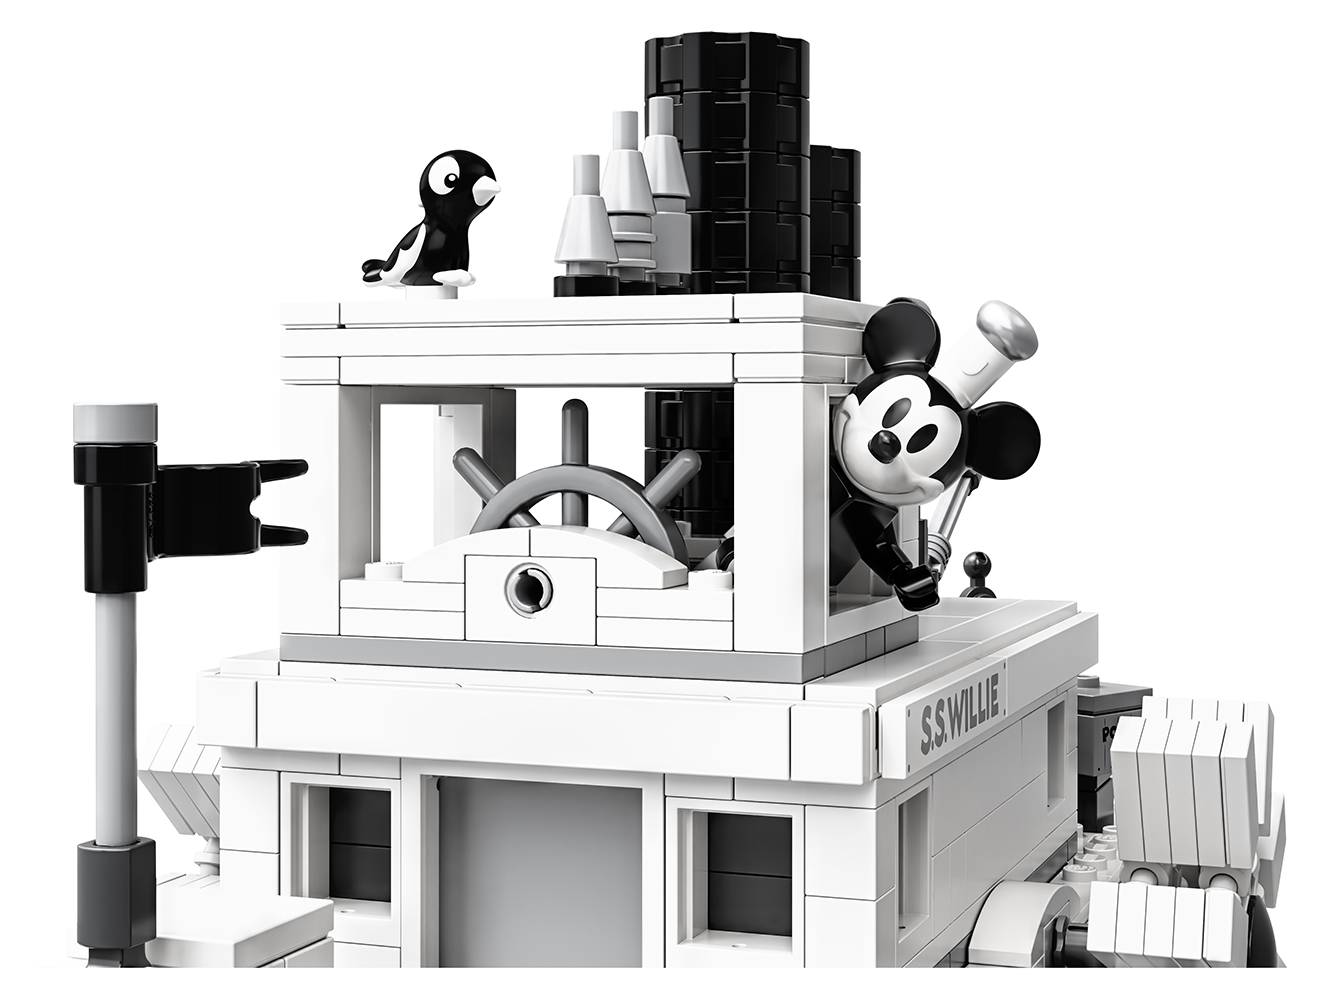 LEGO Celebrates Mickey's 90th With New Must Have Steamboat Willie Set!